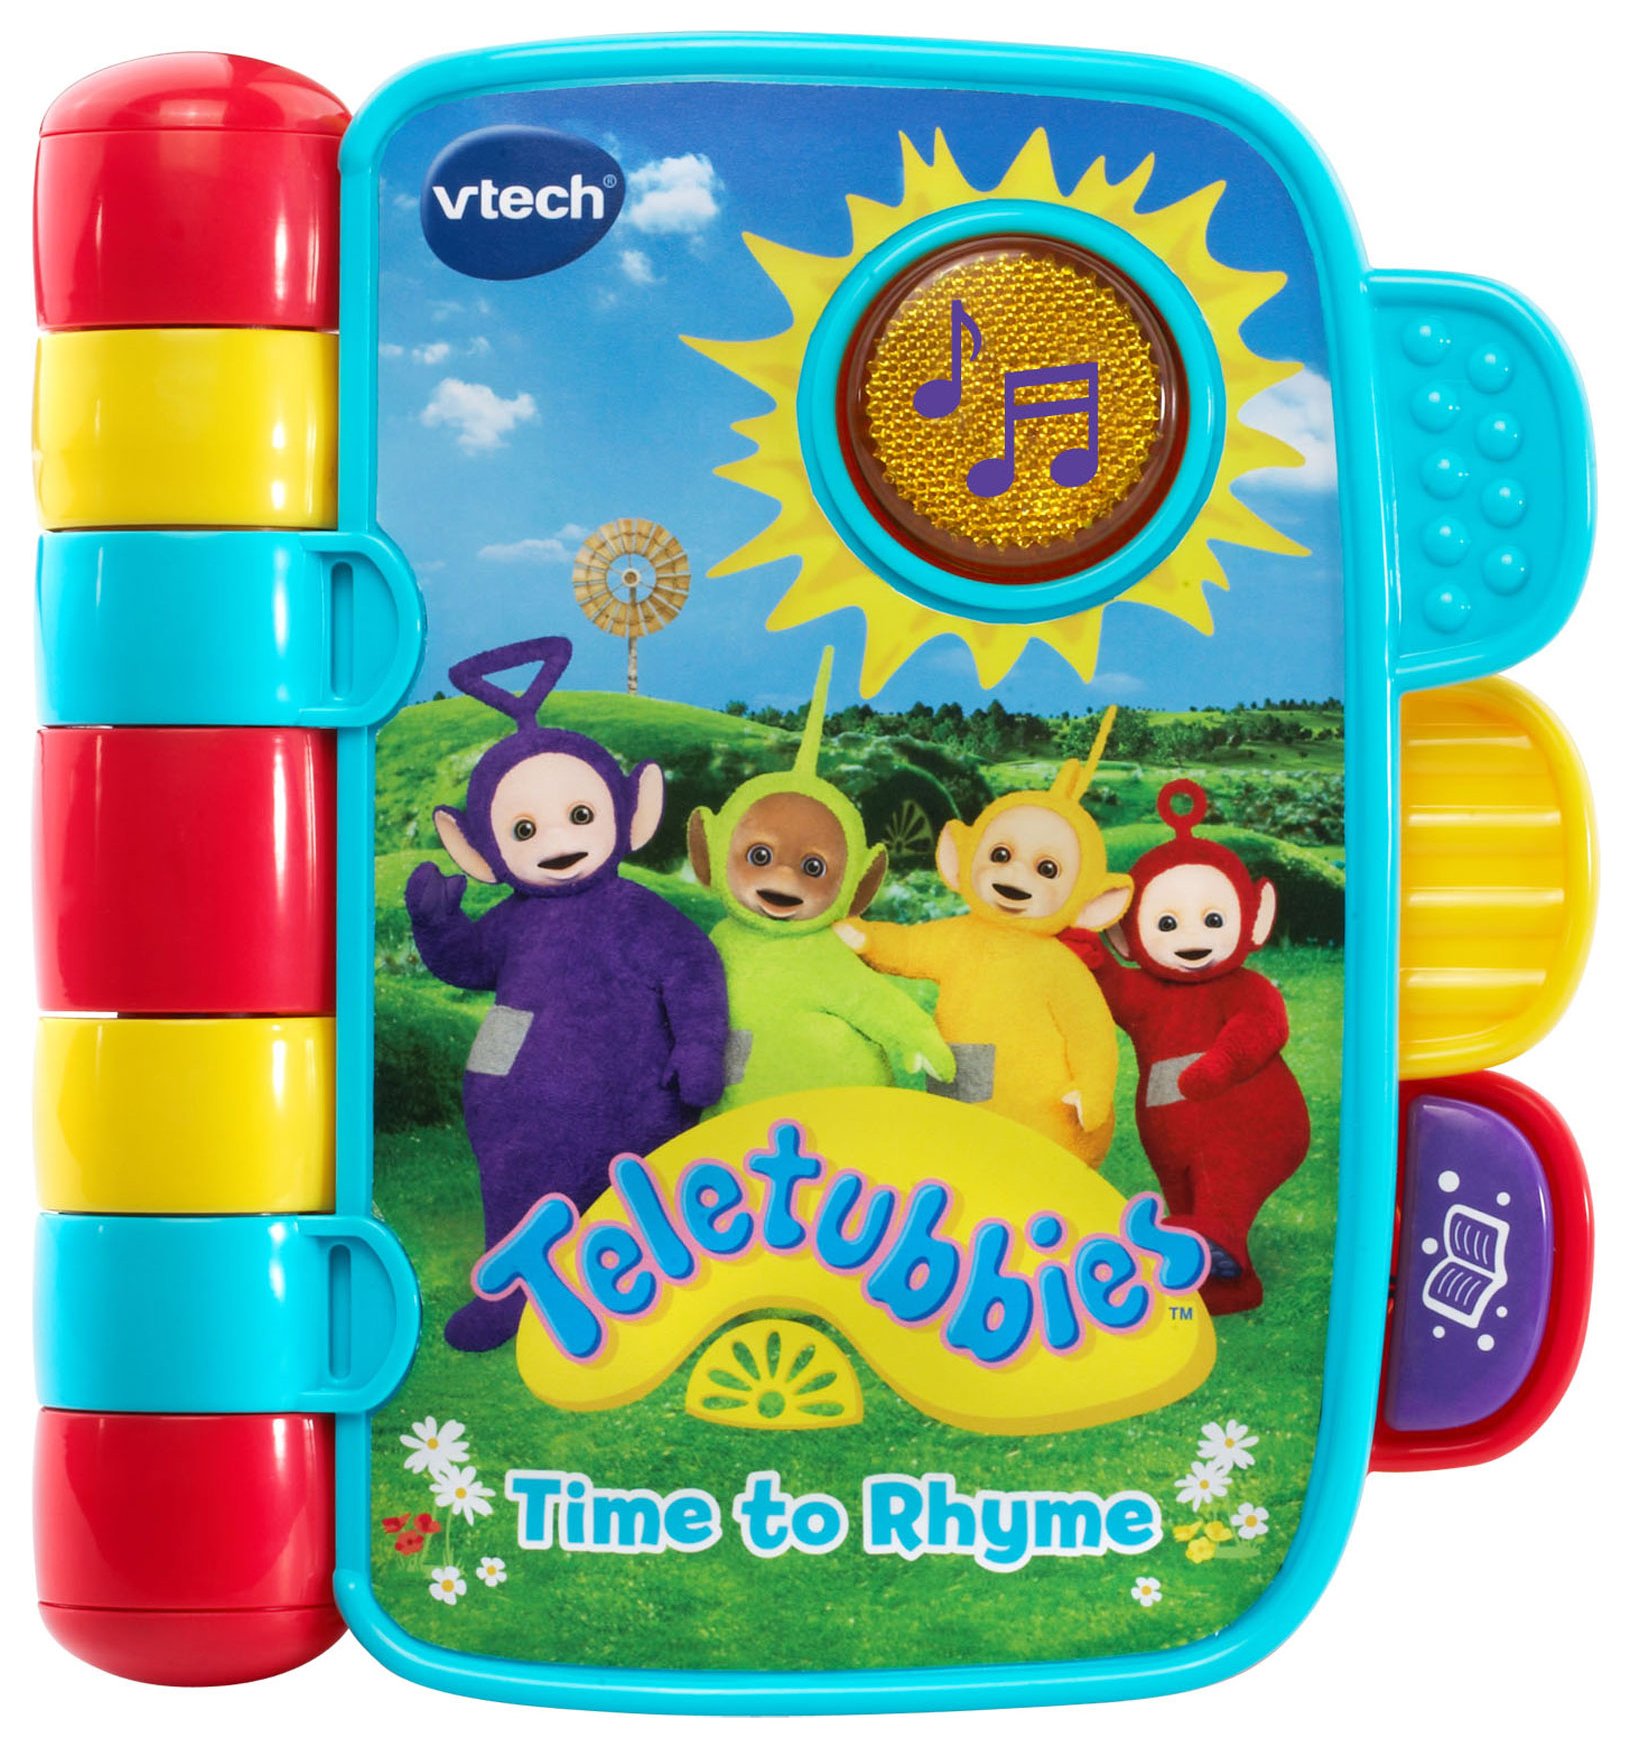 VTech Teletubbies Time To Rhyme